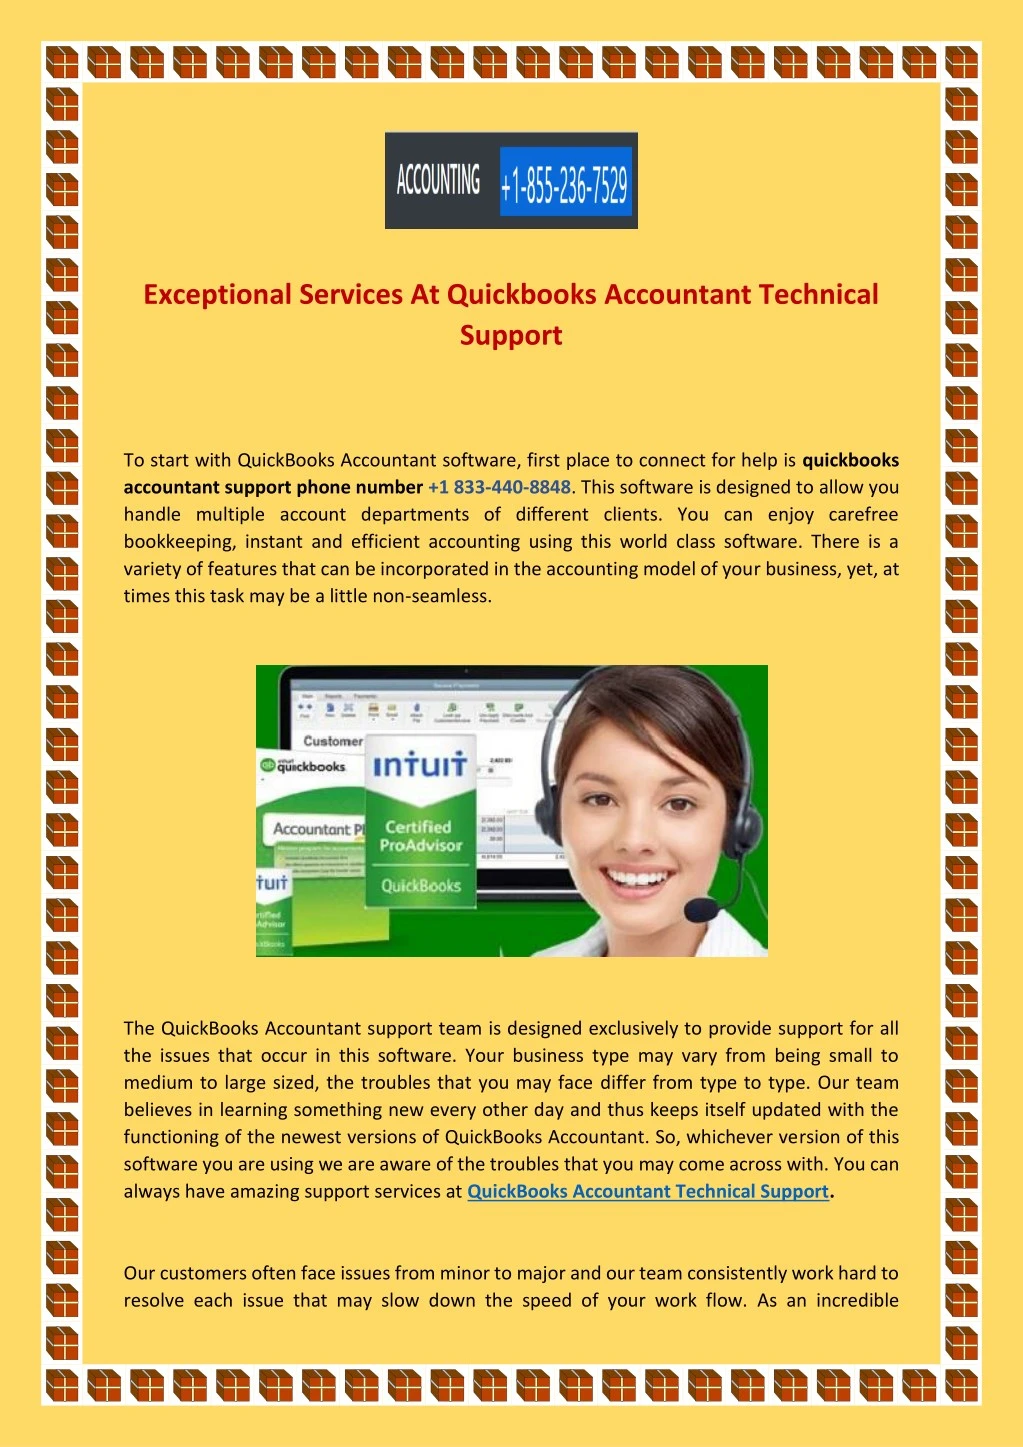 exceptional services at quickbooks accountant